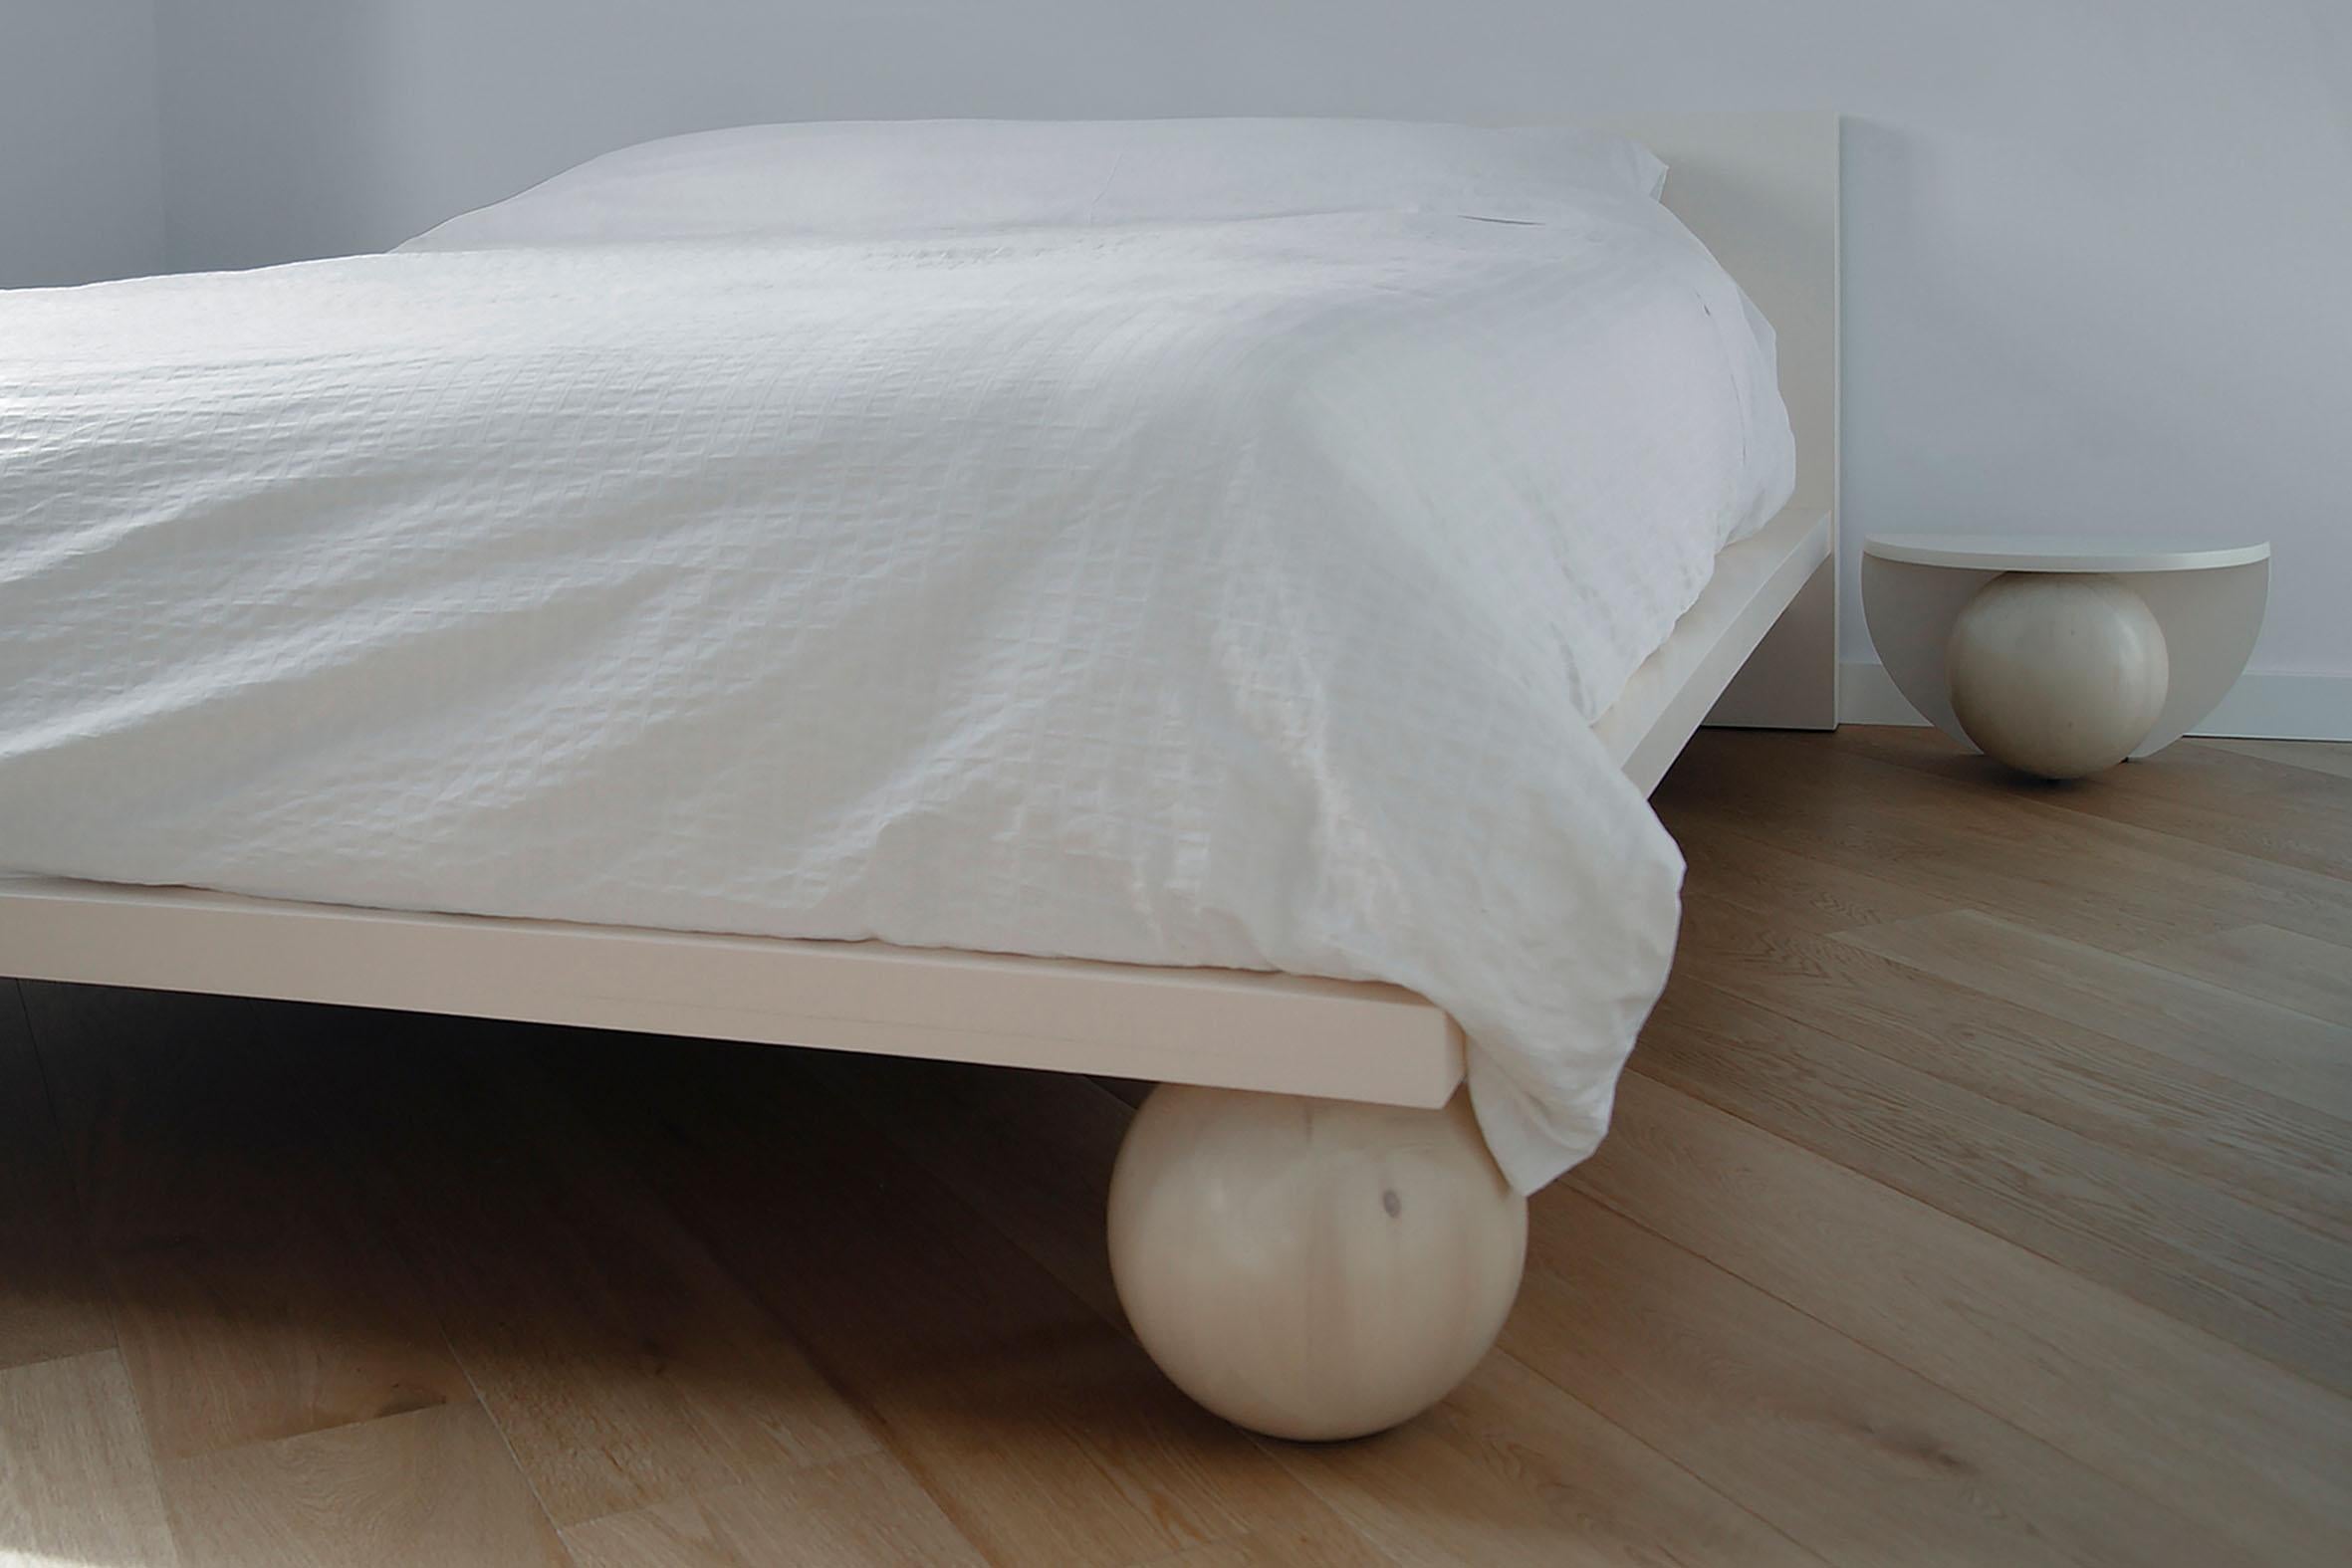 Soft bed by Studio Christinekalia
Dimensions: W 180 x D 220 x H 75 cm.
Materials: Swedish pine solid wood. 

The SOFT collection evolved naturally as a comforting design to the previous collections of the brand. The design evokes calmness and